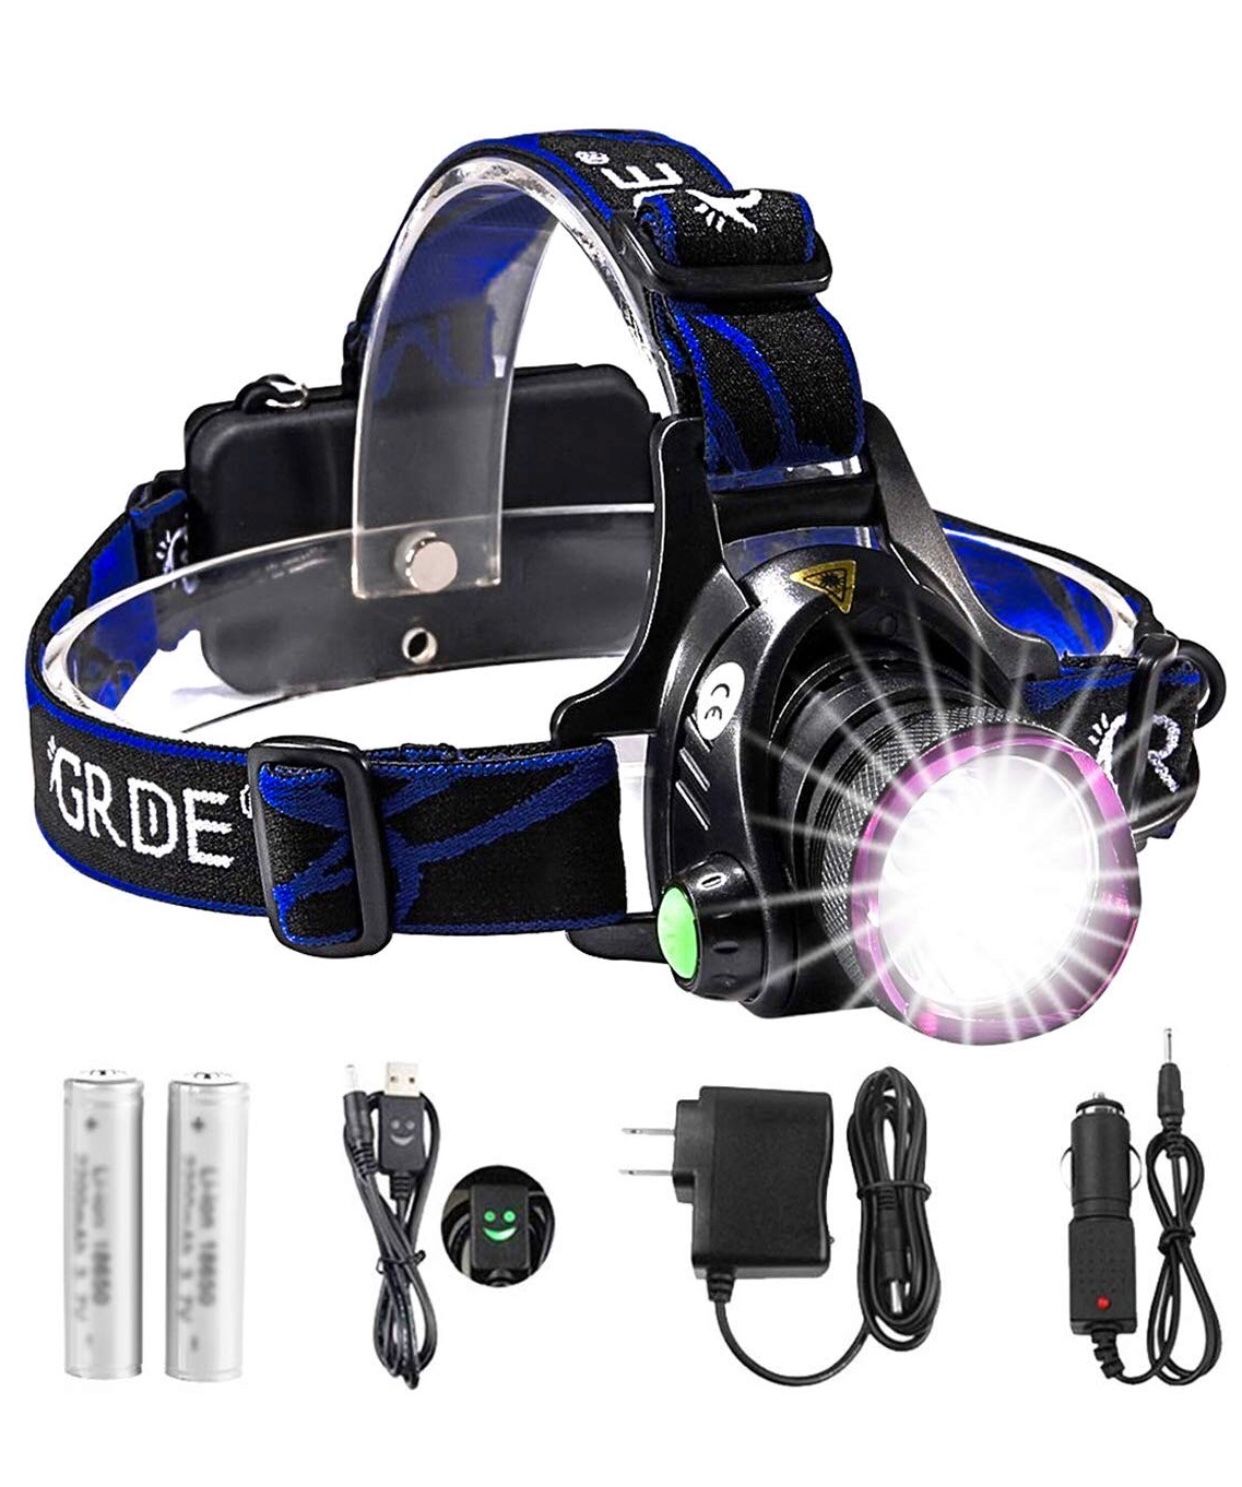 Headlamp, Zoomable Brightest High LED Work Headlight 3 Modes with Rechargeable Batteries Flashlight, USB Cable for Camping, Hiking, Outdoors (Purple)